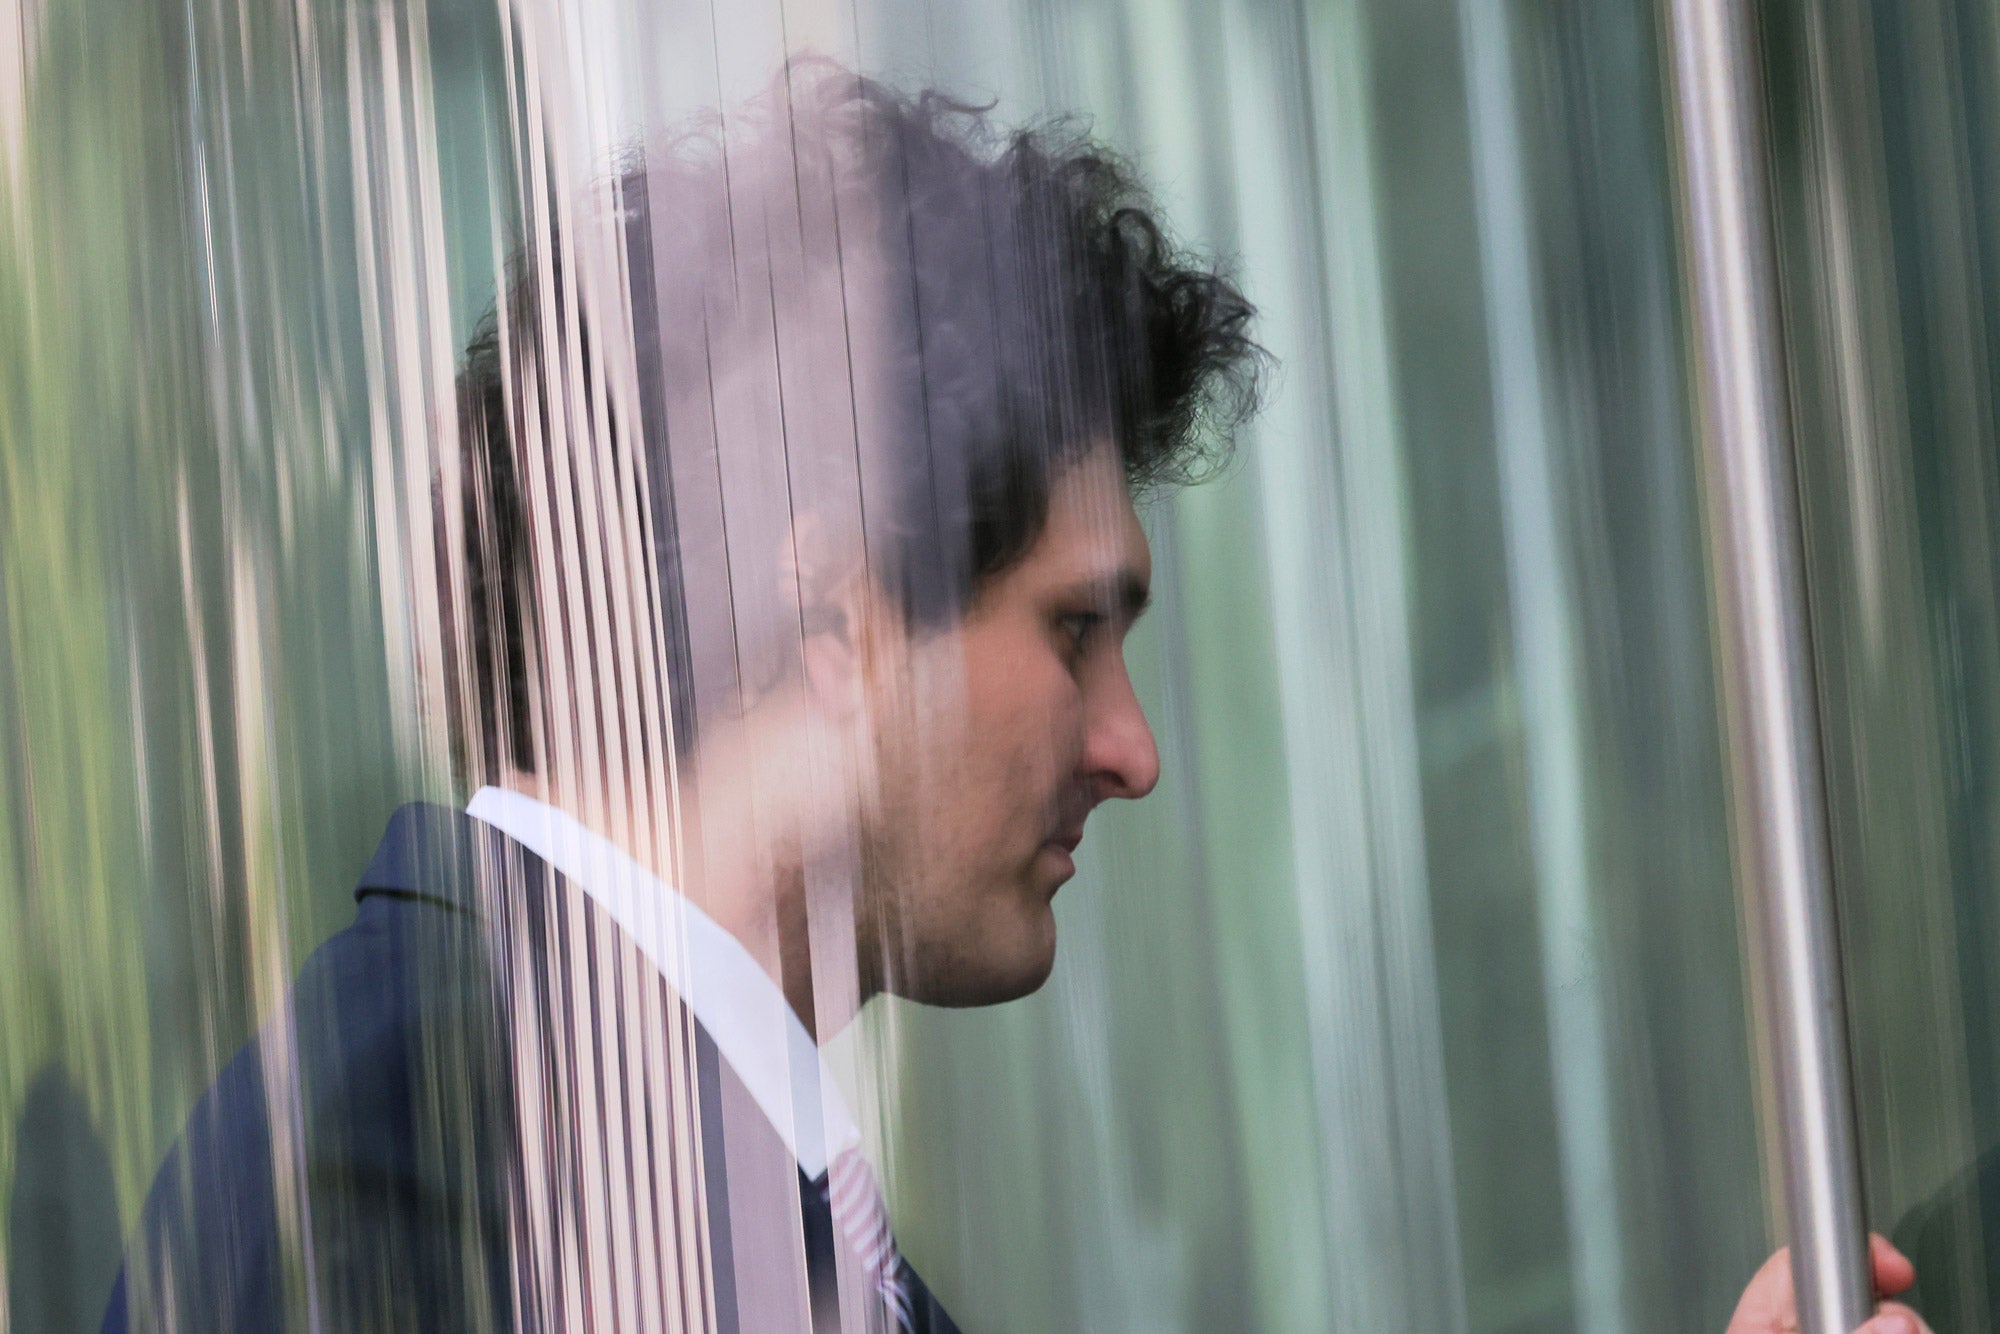 Sam Bankman-Fried, viewed through a pane of glass, enters a revolving door. He looks solemnly ahead.